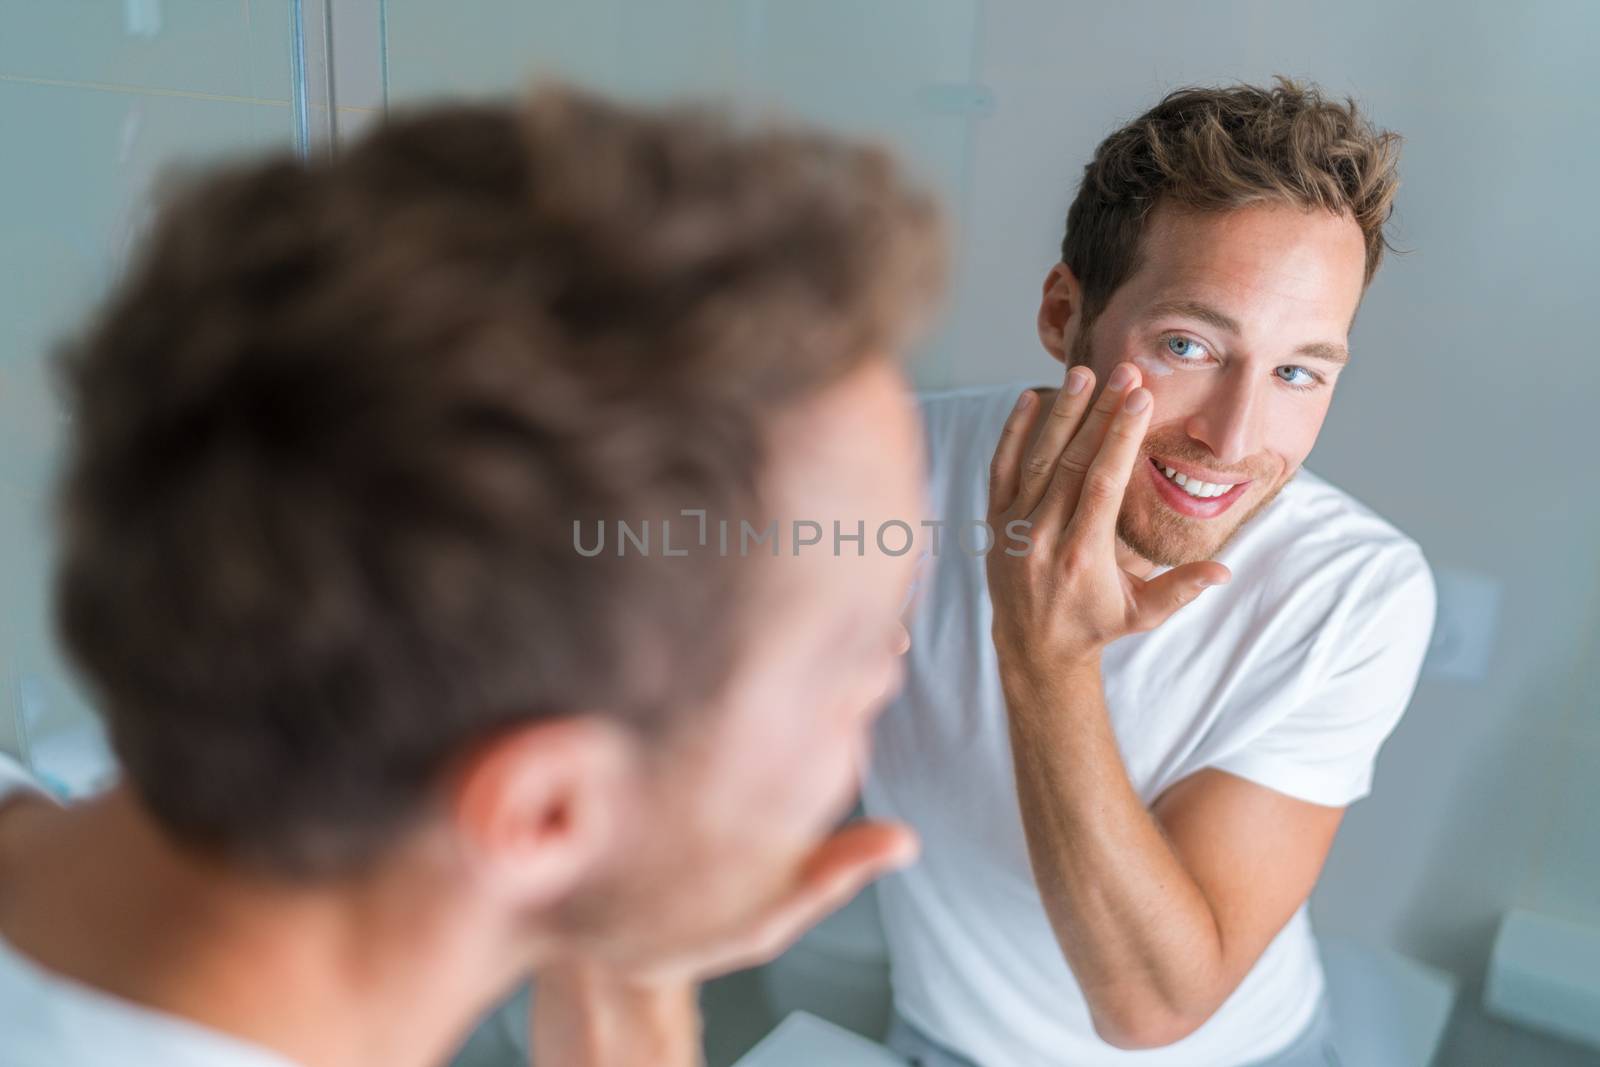 Man putting skincare facial treatment cream on face. Anti-aging skin care product. Male beauty morning routine at home lifestyle. Guy looking in bathroom mirror applying moisturizer under eyes.